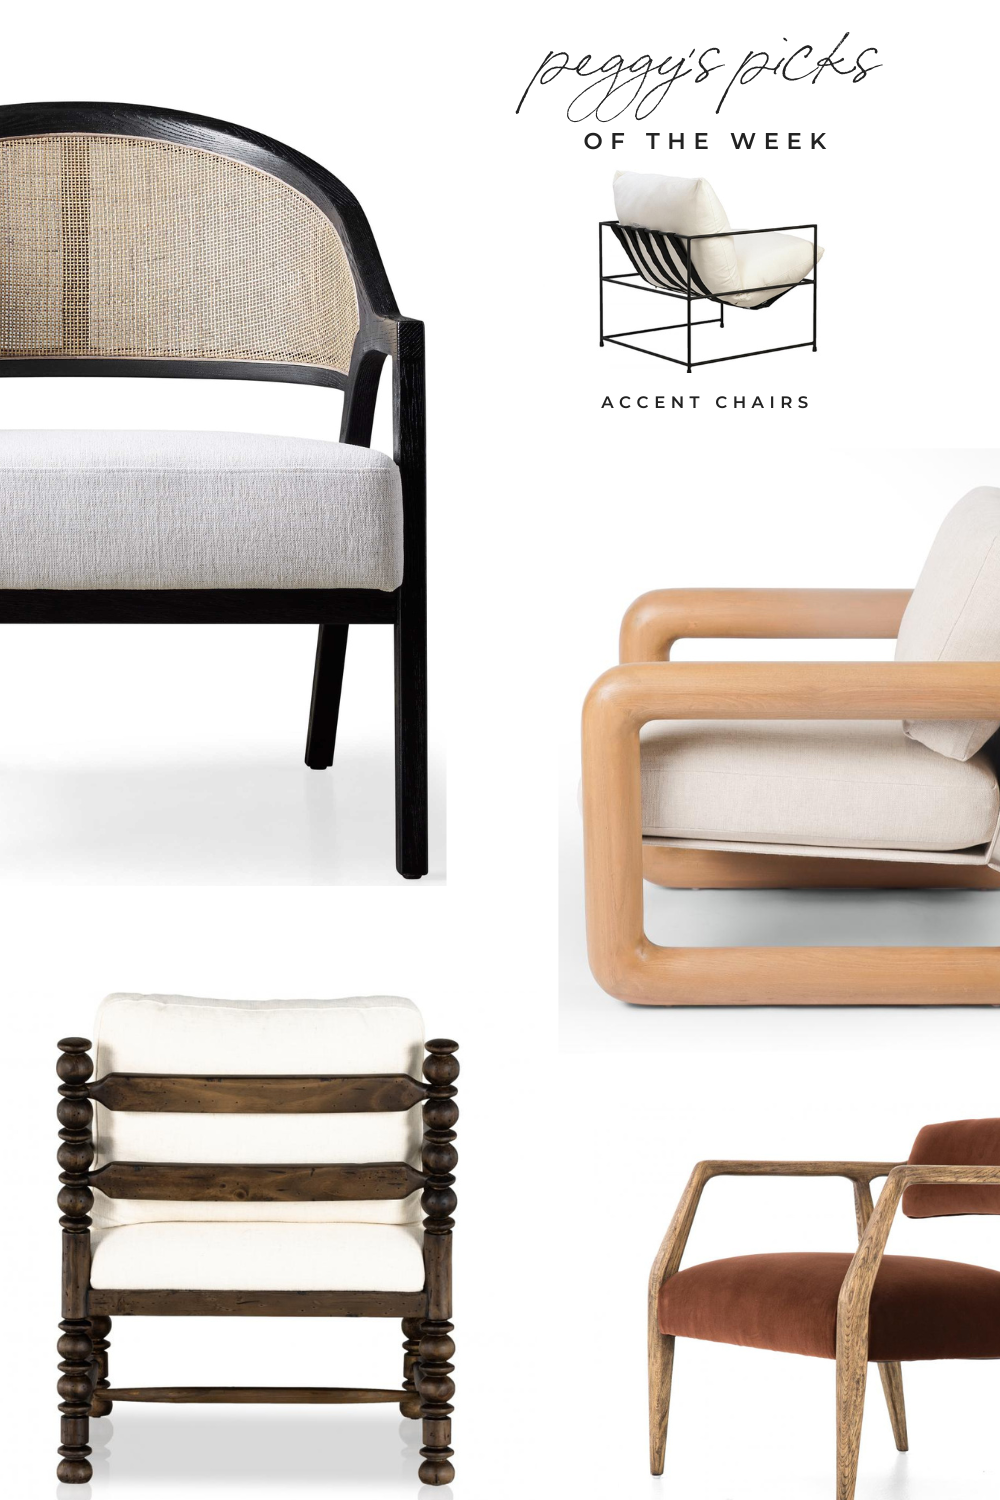 Peggy's Picks of the Week Accent Chairs